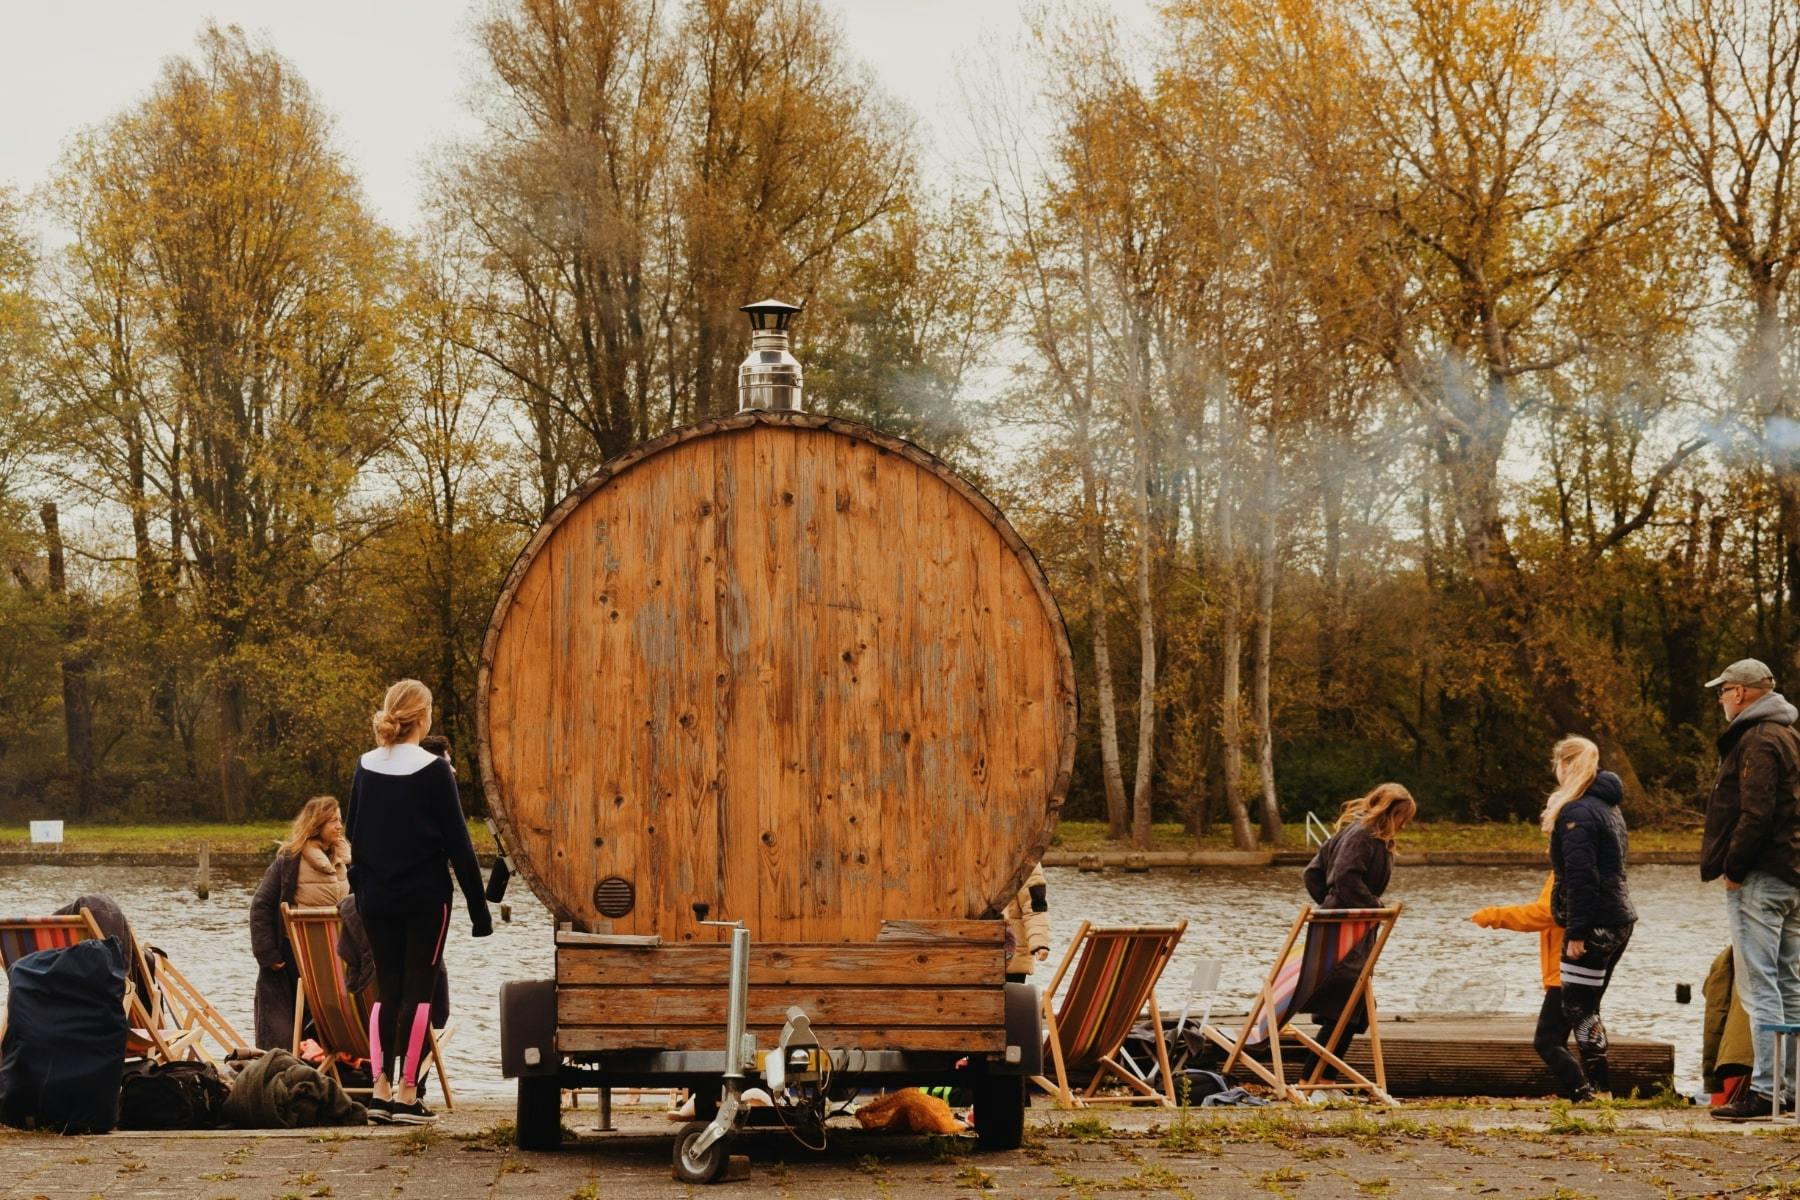 The barrel sauna was rented to pilot the concept of Warm Hearts in the neighborhood. Warm Hearts sauna will be built to float in Sloterplas.